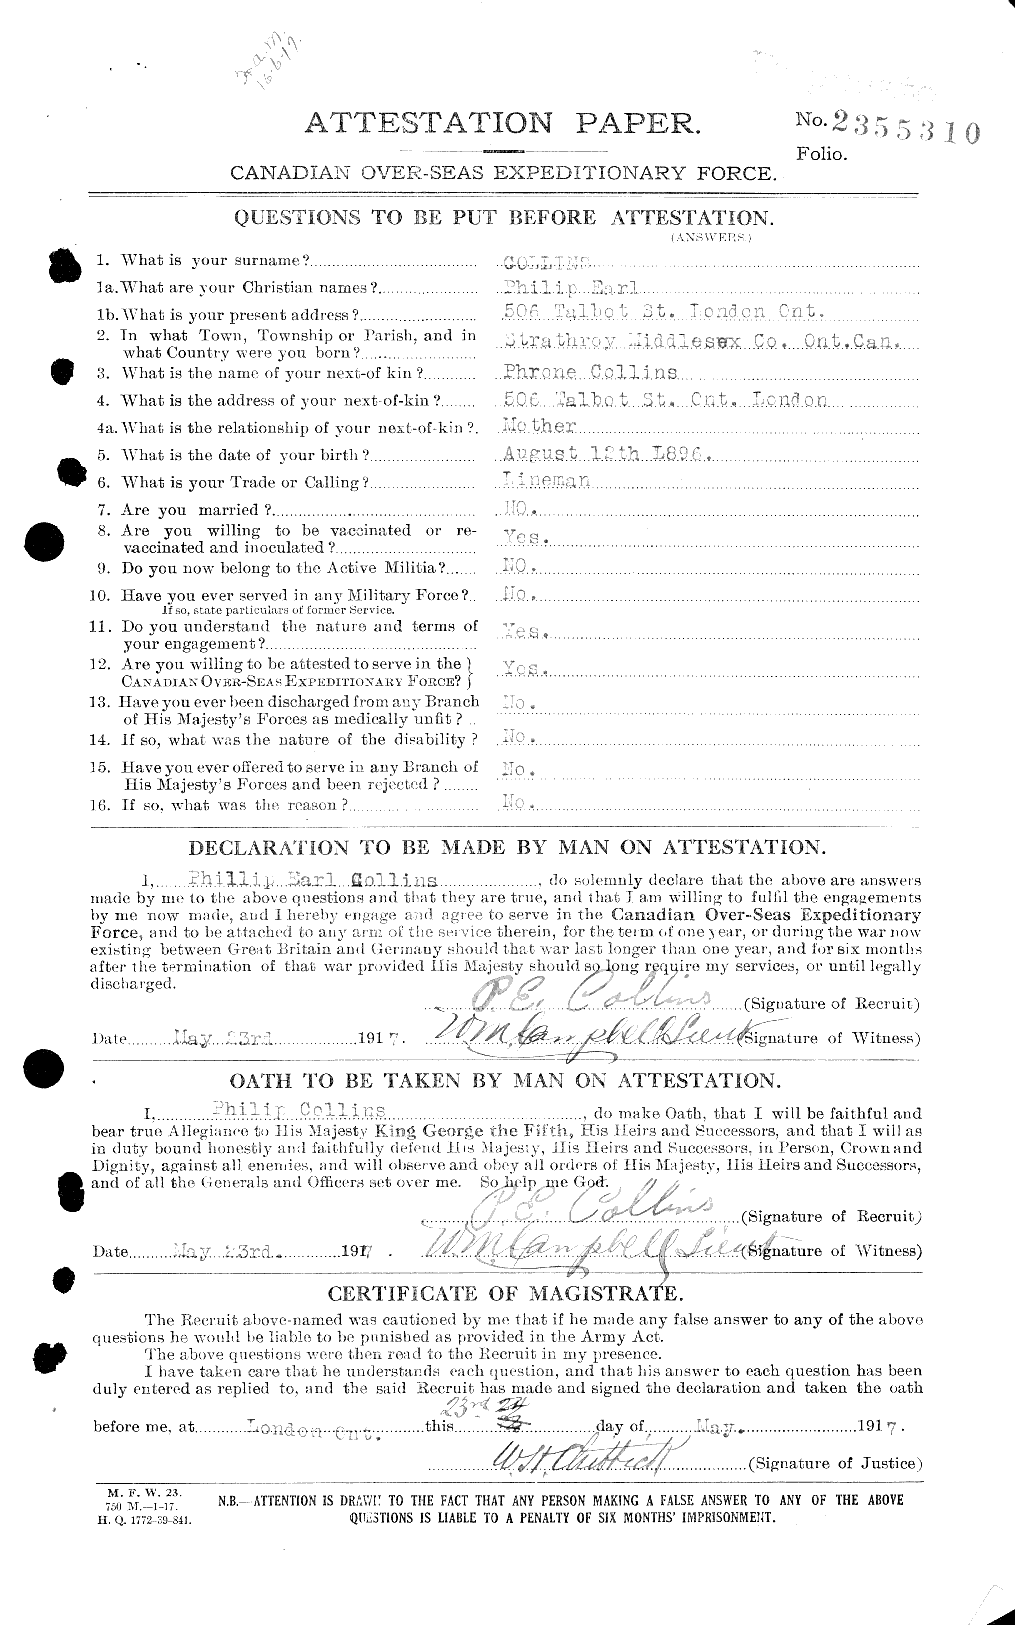 Personnel Records of the First World War - CEF 034503a